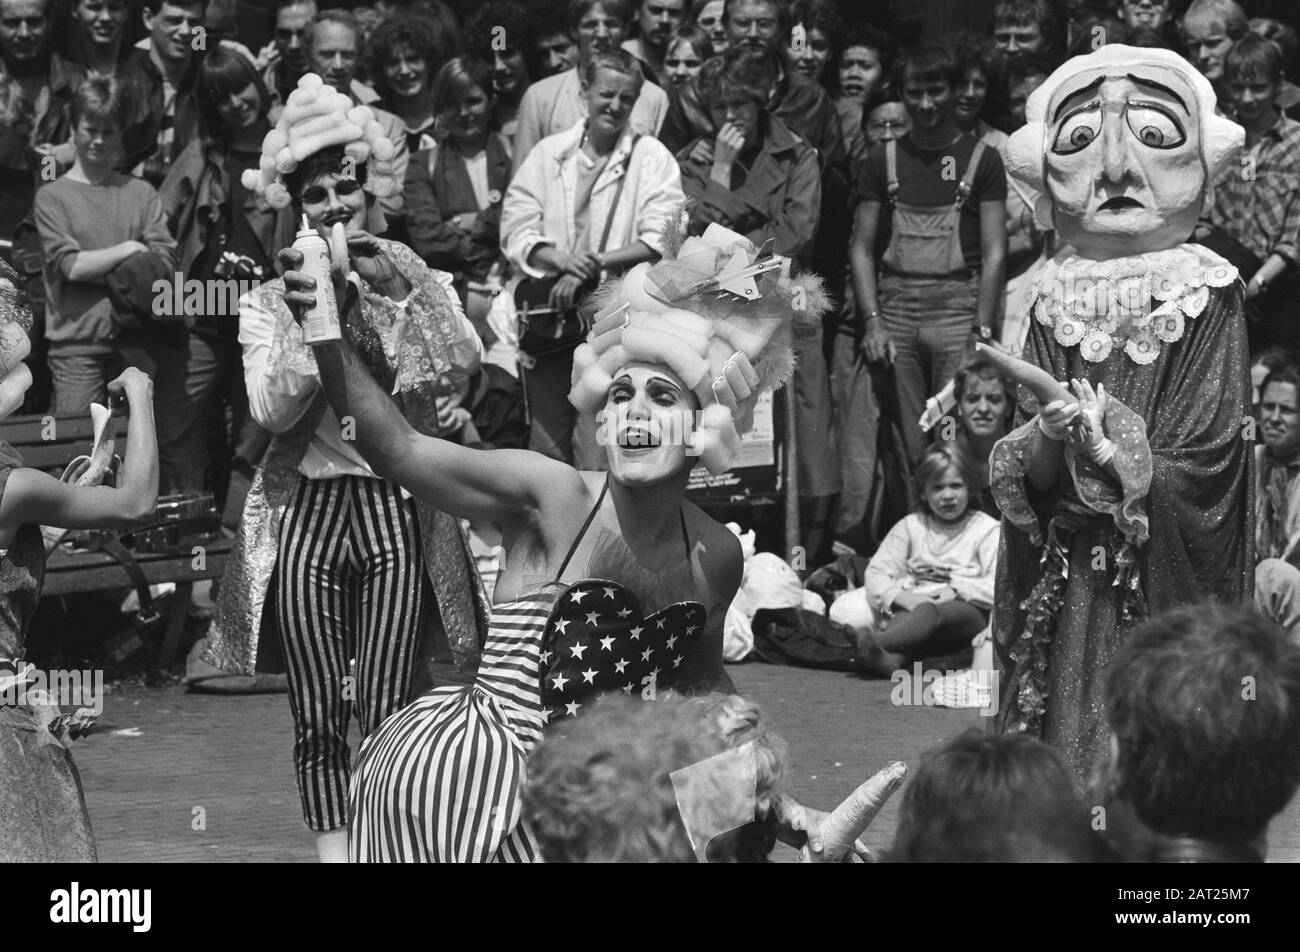 Festival of Fools in Amsterdam; performance of Sheer Madners at the Spui  Date: June 2, 1984 Location: Amsterdam, Noord-Holland Keywords: festivals  Stock Photo - Alamy